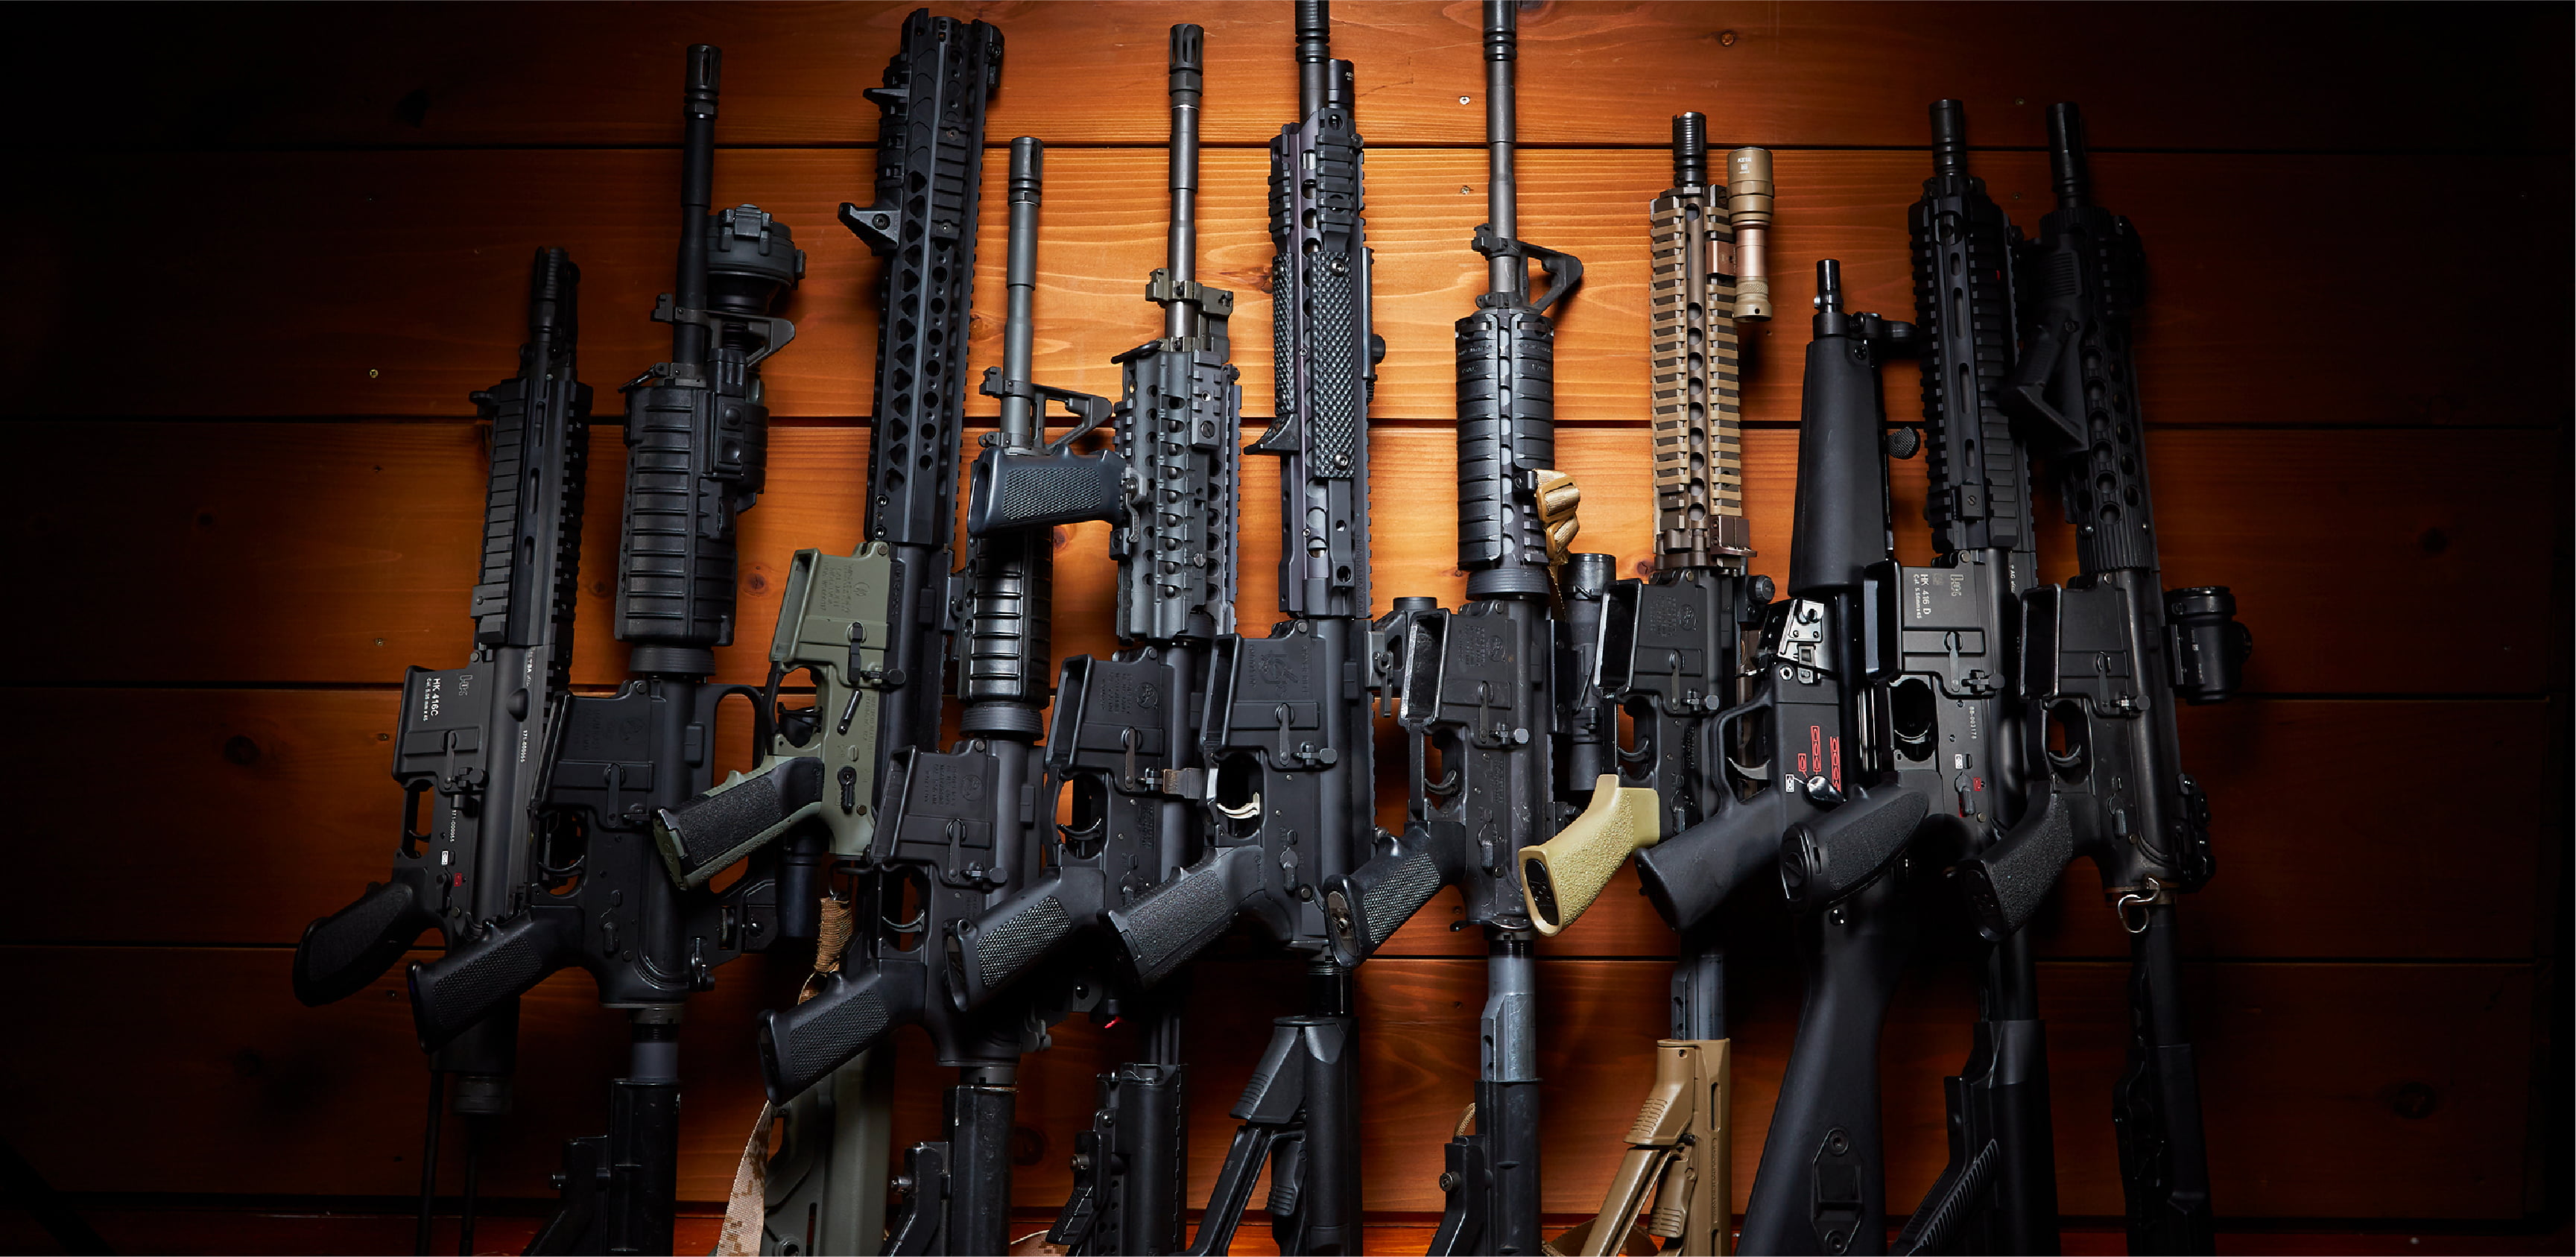 Guns Gun Parts from U.S. Manufacturers Authorized Import Agent